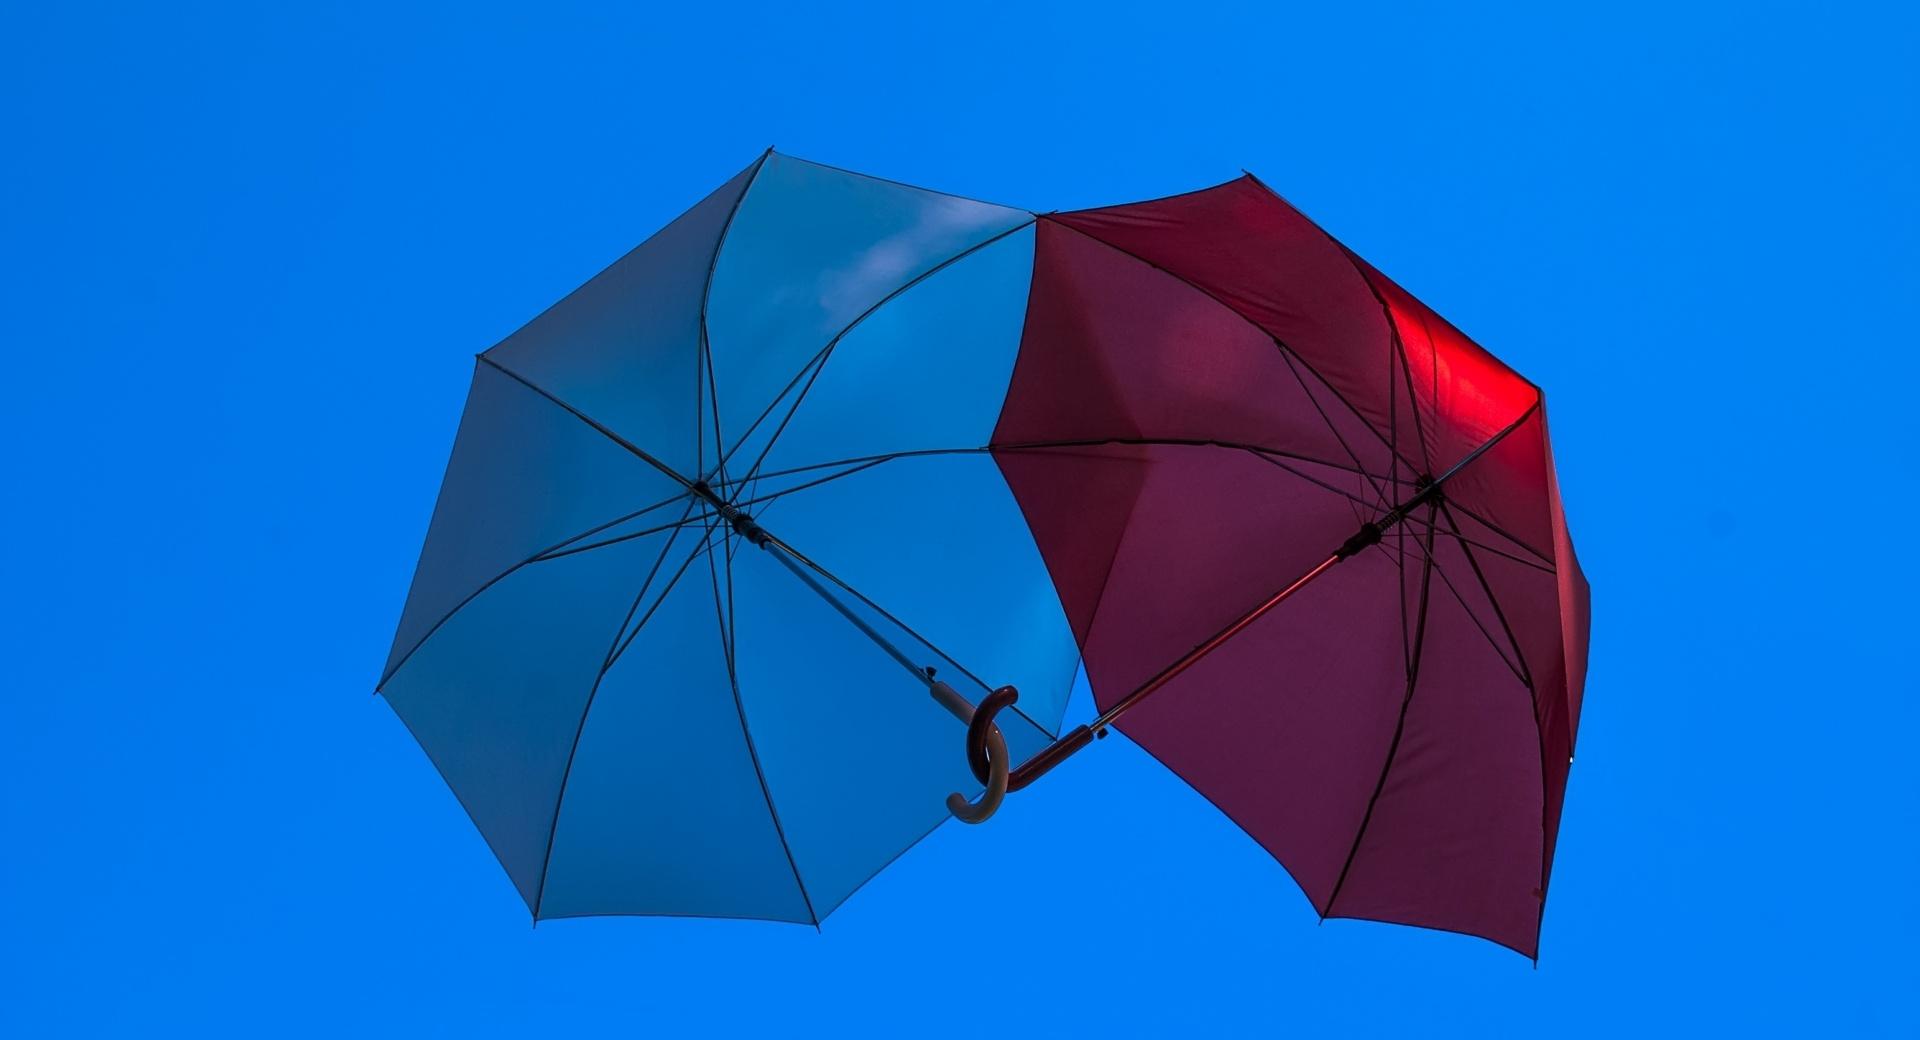 Two Umbrellas wallpapers HD quality